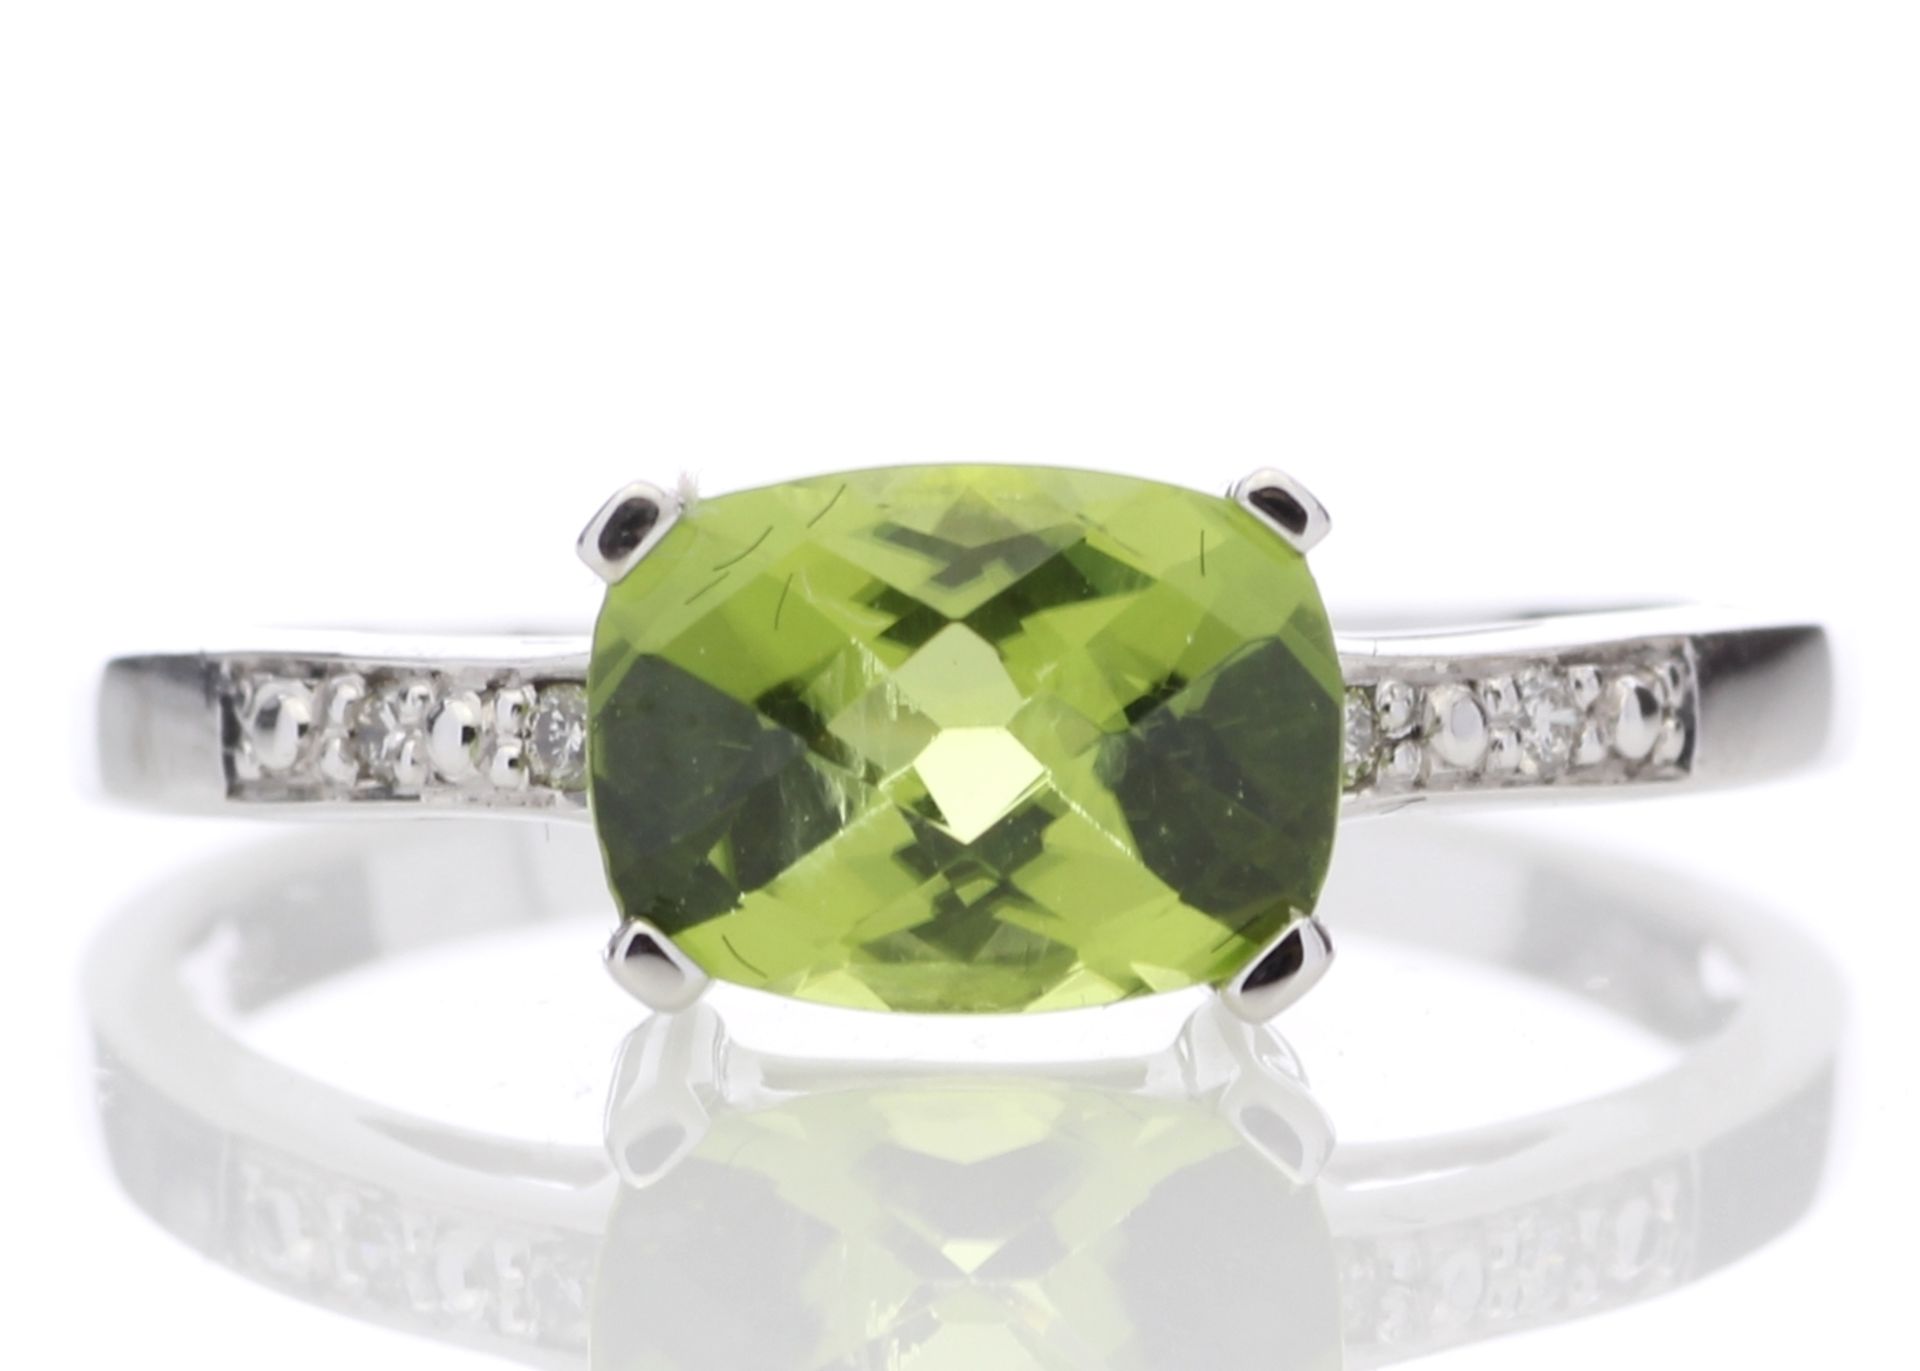 9ct White Gold Peridot Diamond Ring - Valued By IDI £1,630.00 - This stunning ring with a gorgeous